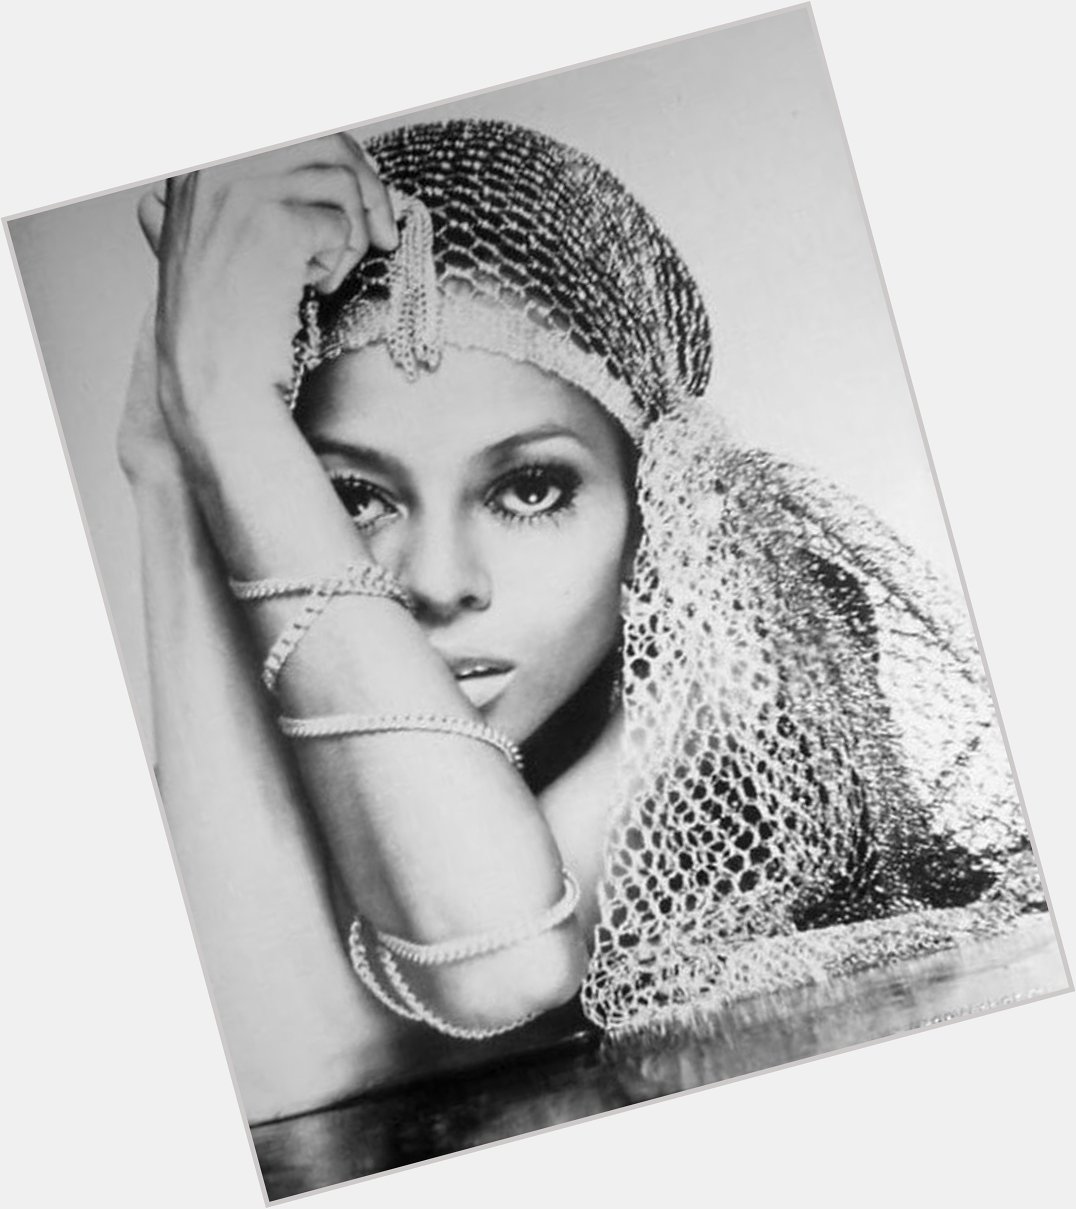 Happy 75th birthday to a living legend, Diana Ross. 